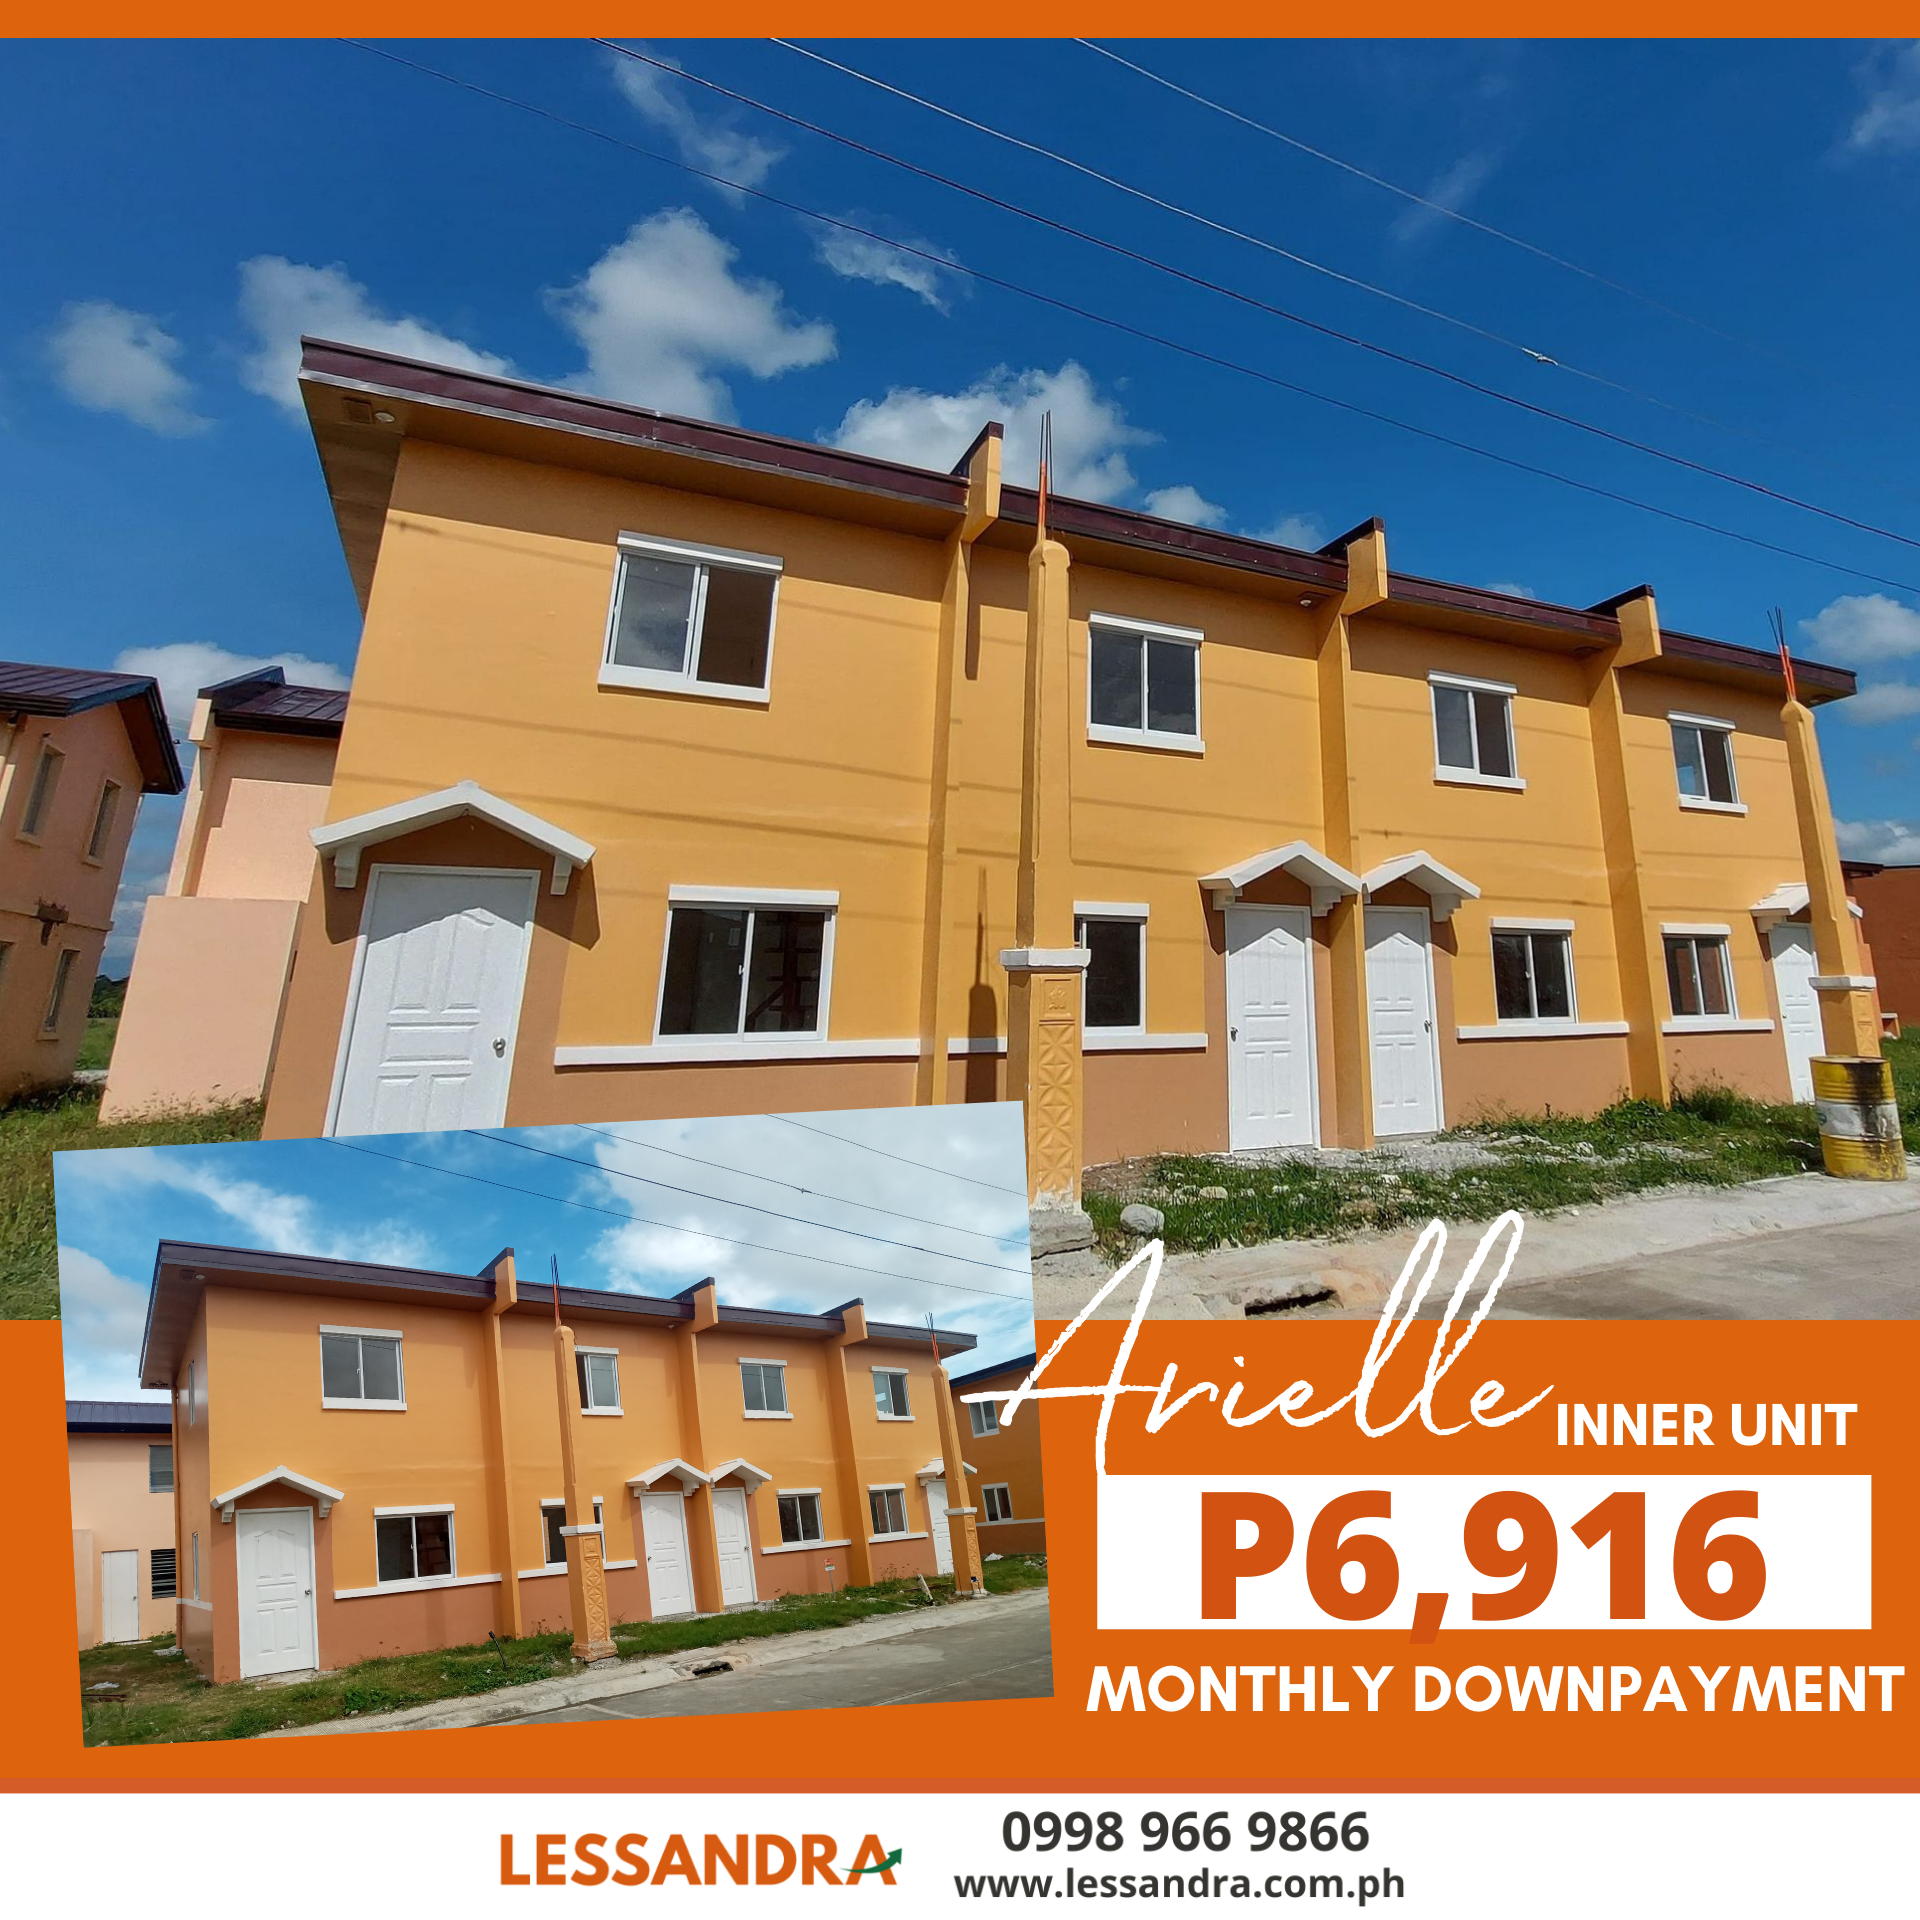 AFFORDABLE TOWNHOUSE INNER UNIT IN ILOILO – PAG IBIG FINANCING